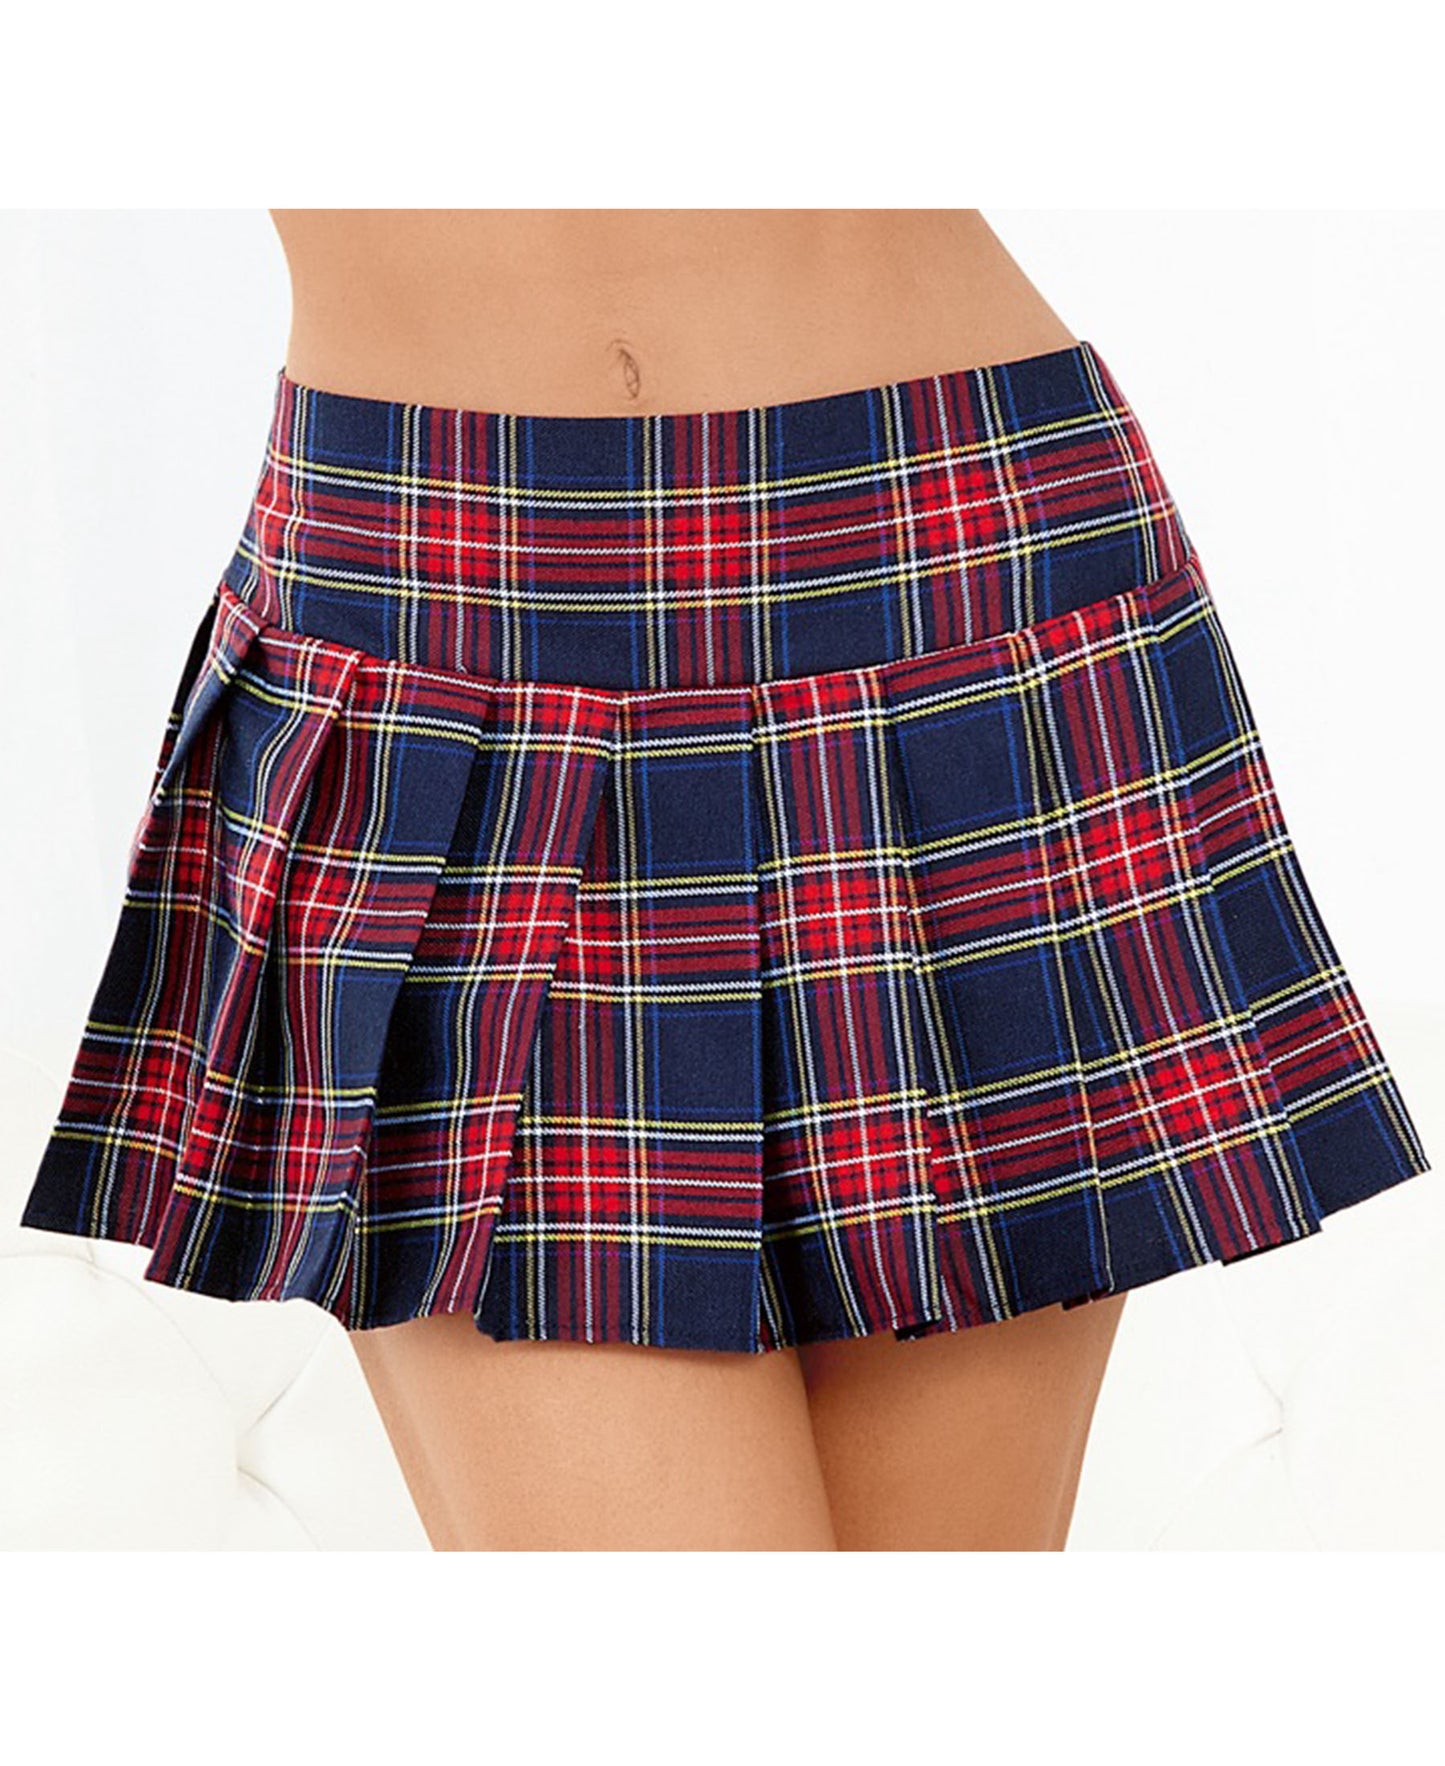 5123 Classic Woven Plaid Pleated Skirt red/plaid front view 